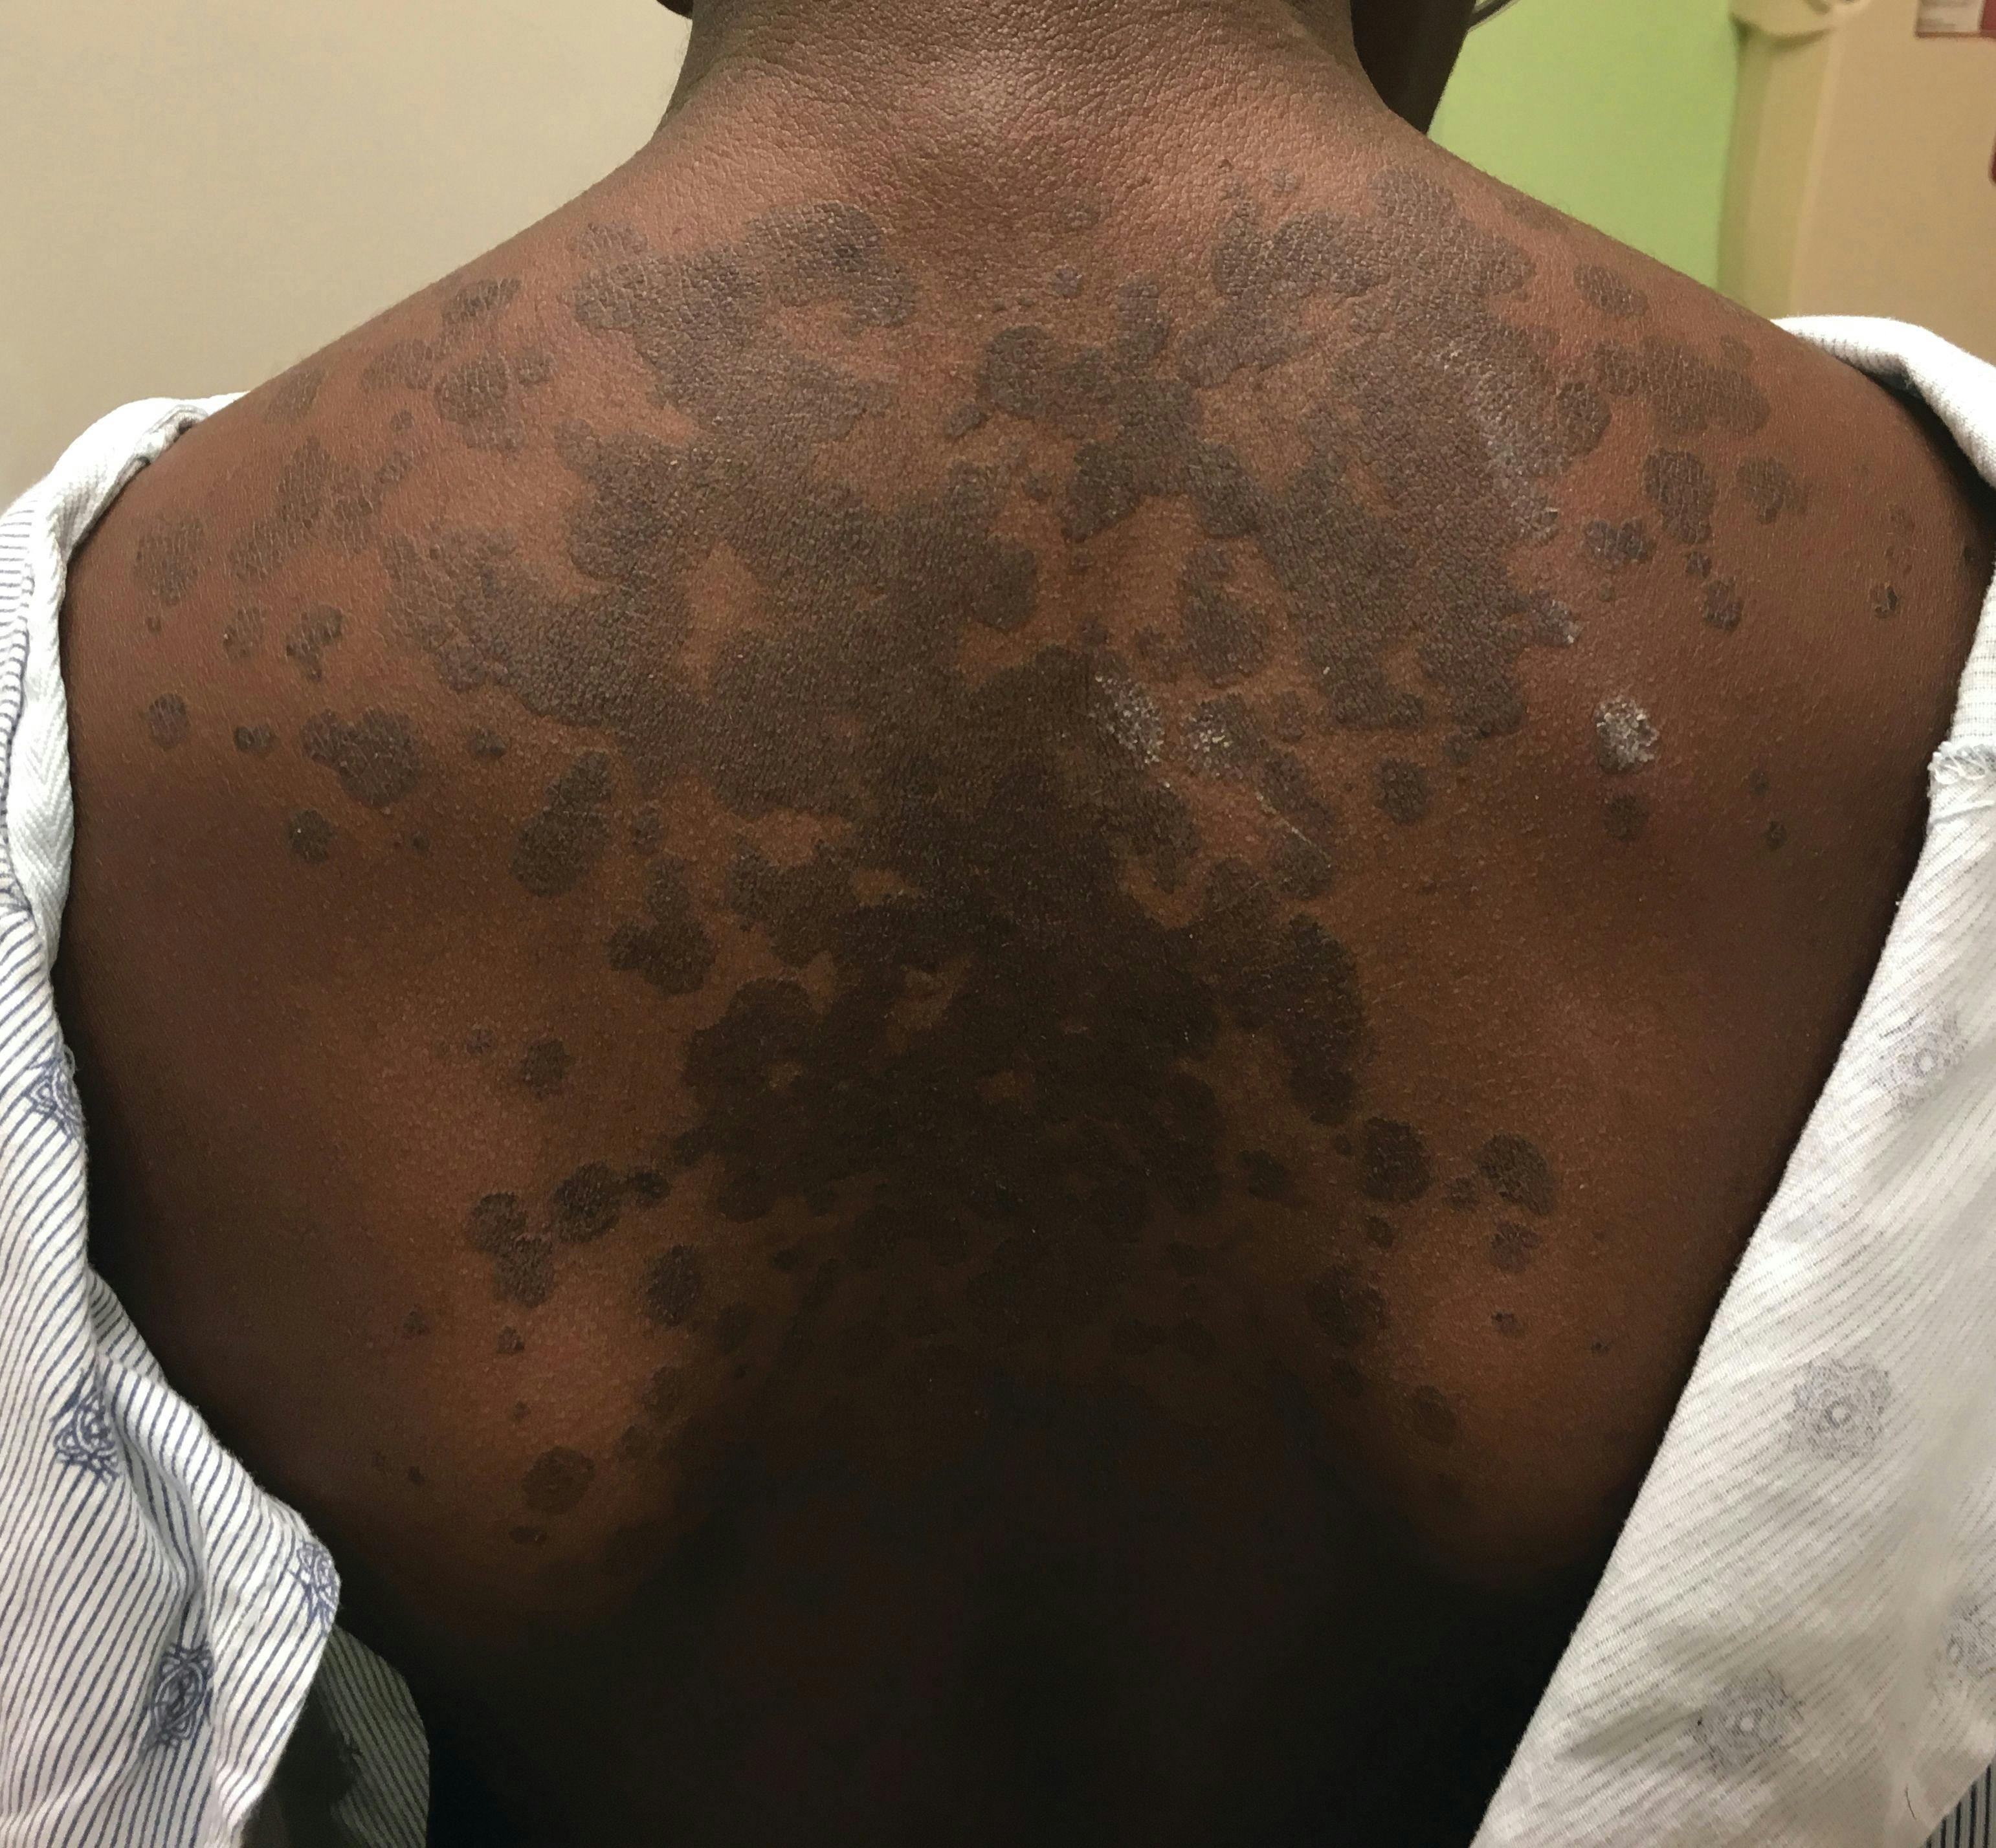 A 13-year-old girl with welldemarcated rash on back and chest | Image Credit: © Author provided - © Author provided  - stock.adobe.com.